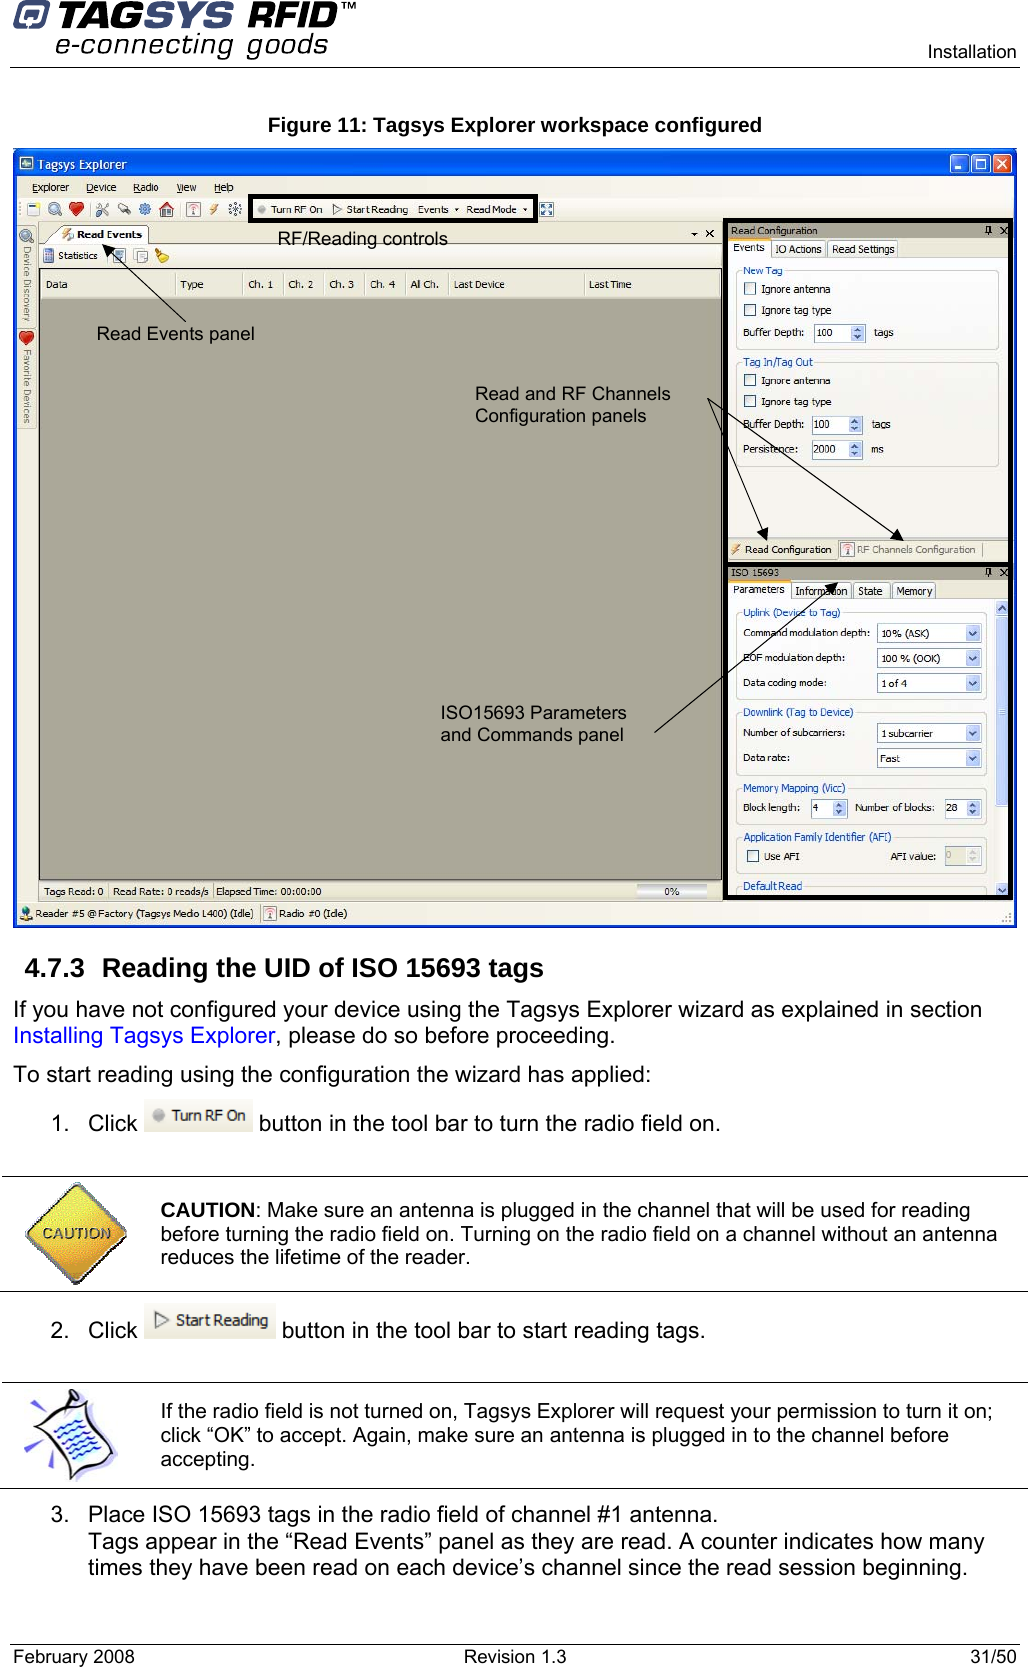      Installation February 2008  Revision 1.3  31/50  Figure 11: Tagsys Explorer workspace configured  4.7.3  Reading the UID of ISO 15693 tags If you have not configured your device using the Tagsys Explorer wizard as explained in section Installing Tagsys Explorer, please do so before proceeding. To start reading using the configuration the wizard has applied: 1. Click   button in the tool bar to turn the radio field on.   CAUTION: Make sure an antenna is plugged in the channel that will be used for reading before turning the radio field on. Turning on the radio field on a channel without an antenna reduces the lifetime of the reader. 2. Click   button in the tool bar to start reading tags.   If the radio field is not turned on, Tagsys Explorer will request your permission to turn it on; click “OK” to accept. Again, make sure an antenna is plugged in to the channel before accepting. 3.  Place ISO 15693 tags in the radio field of channel #1 antenna. Tags appear in the “Read Events” panel as they are read. A counter indicates how many times they have been read on each device’s channel since the read session beginning. RF/Reading controls Read Events panel  Read and RF Channels Configuration panels   ISO15693 Parameters and Commands panel 